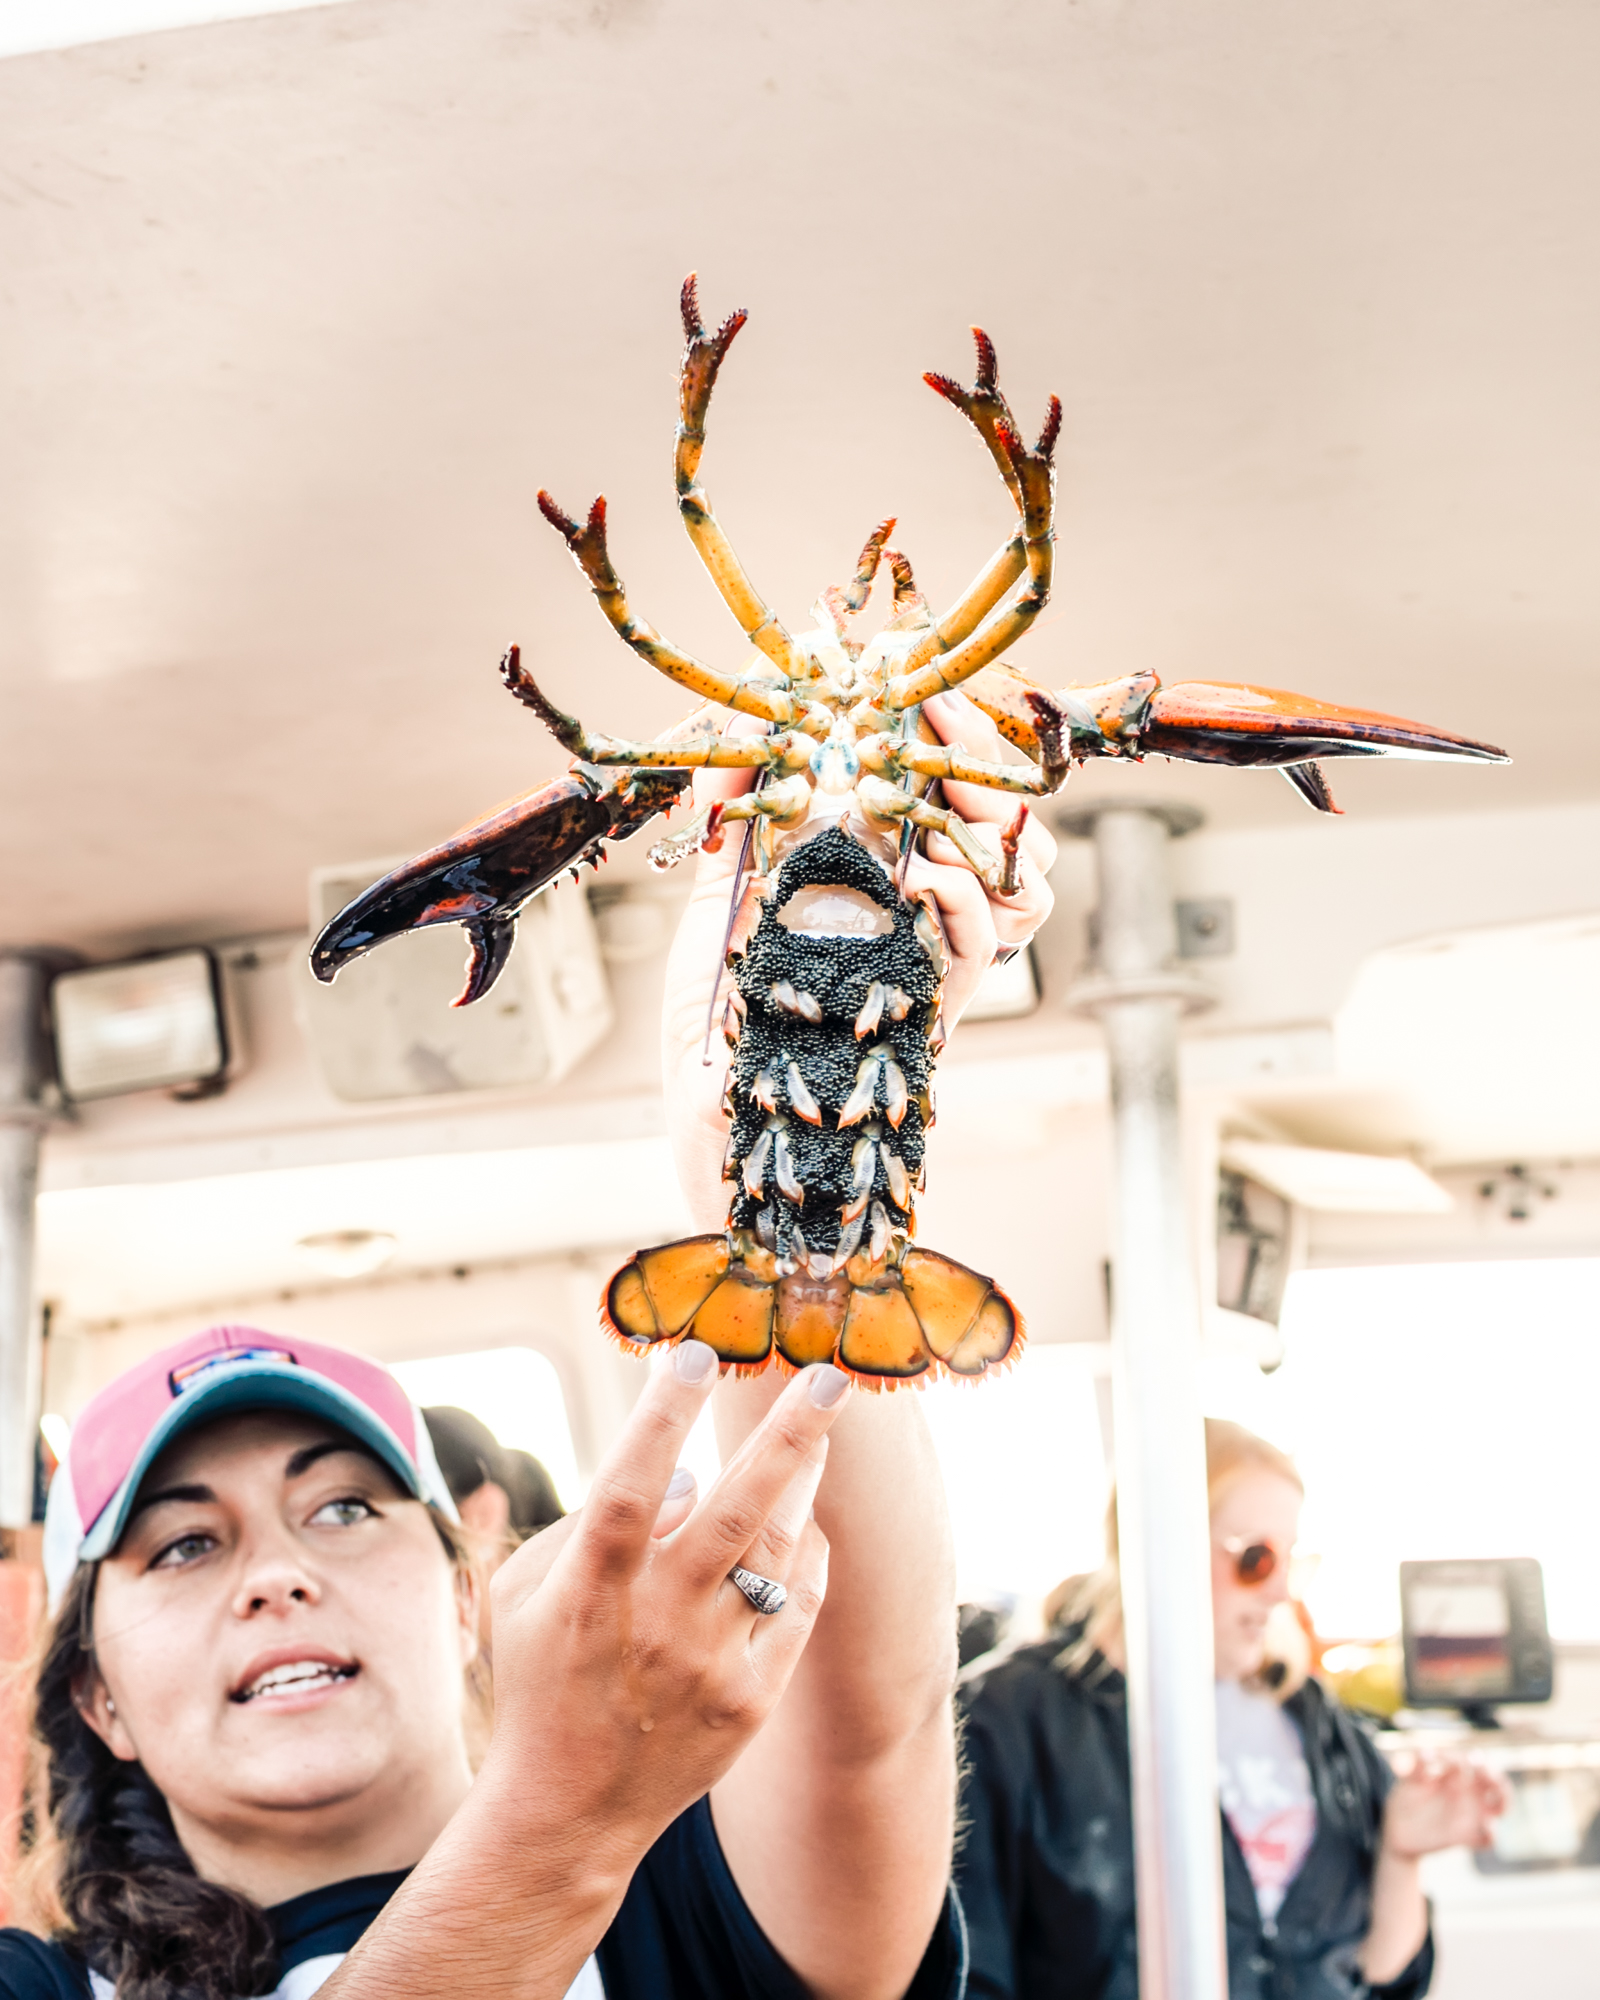 Do this!: Lobster fishing in Portland, Maine with Lucky Catch Cruises.